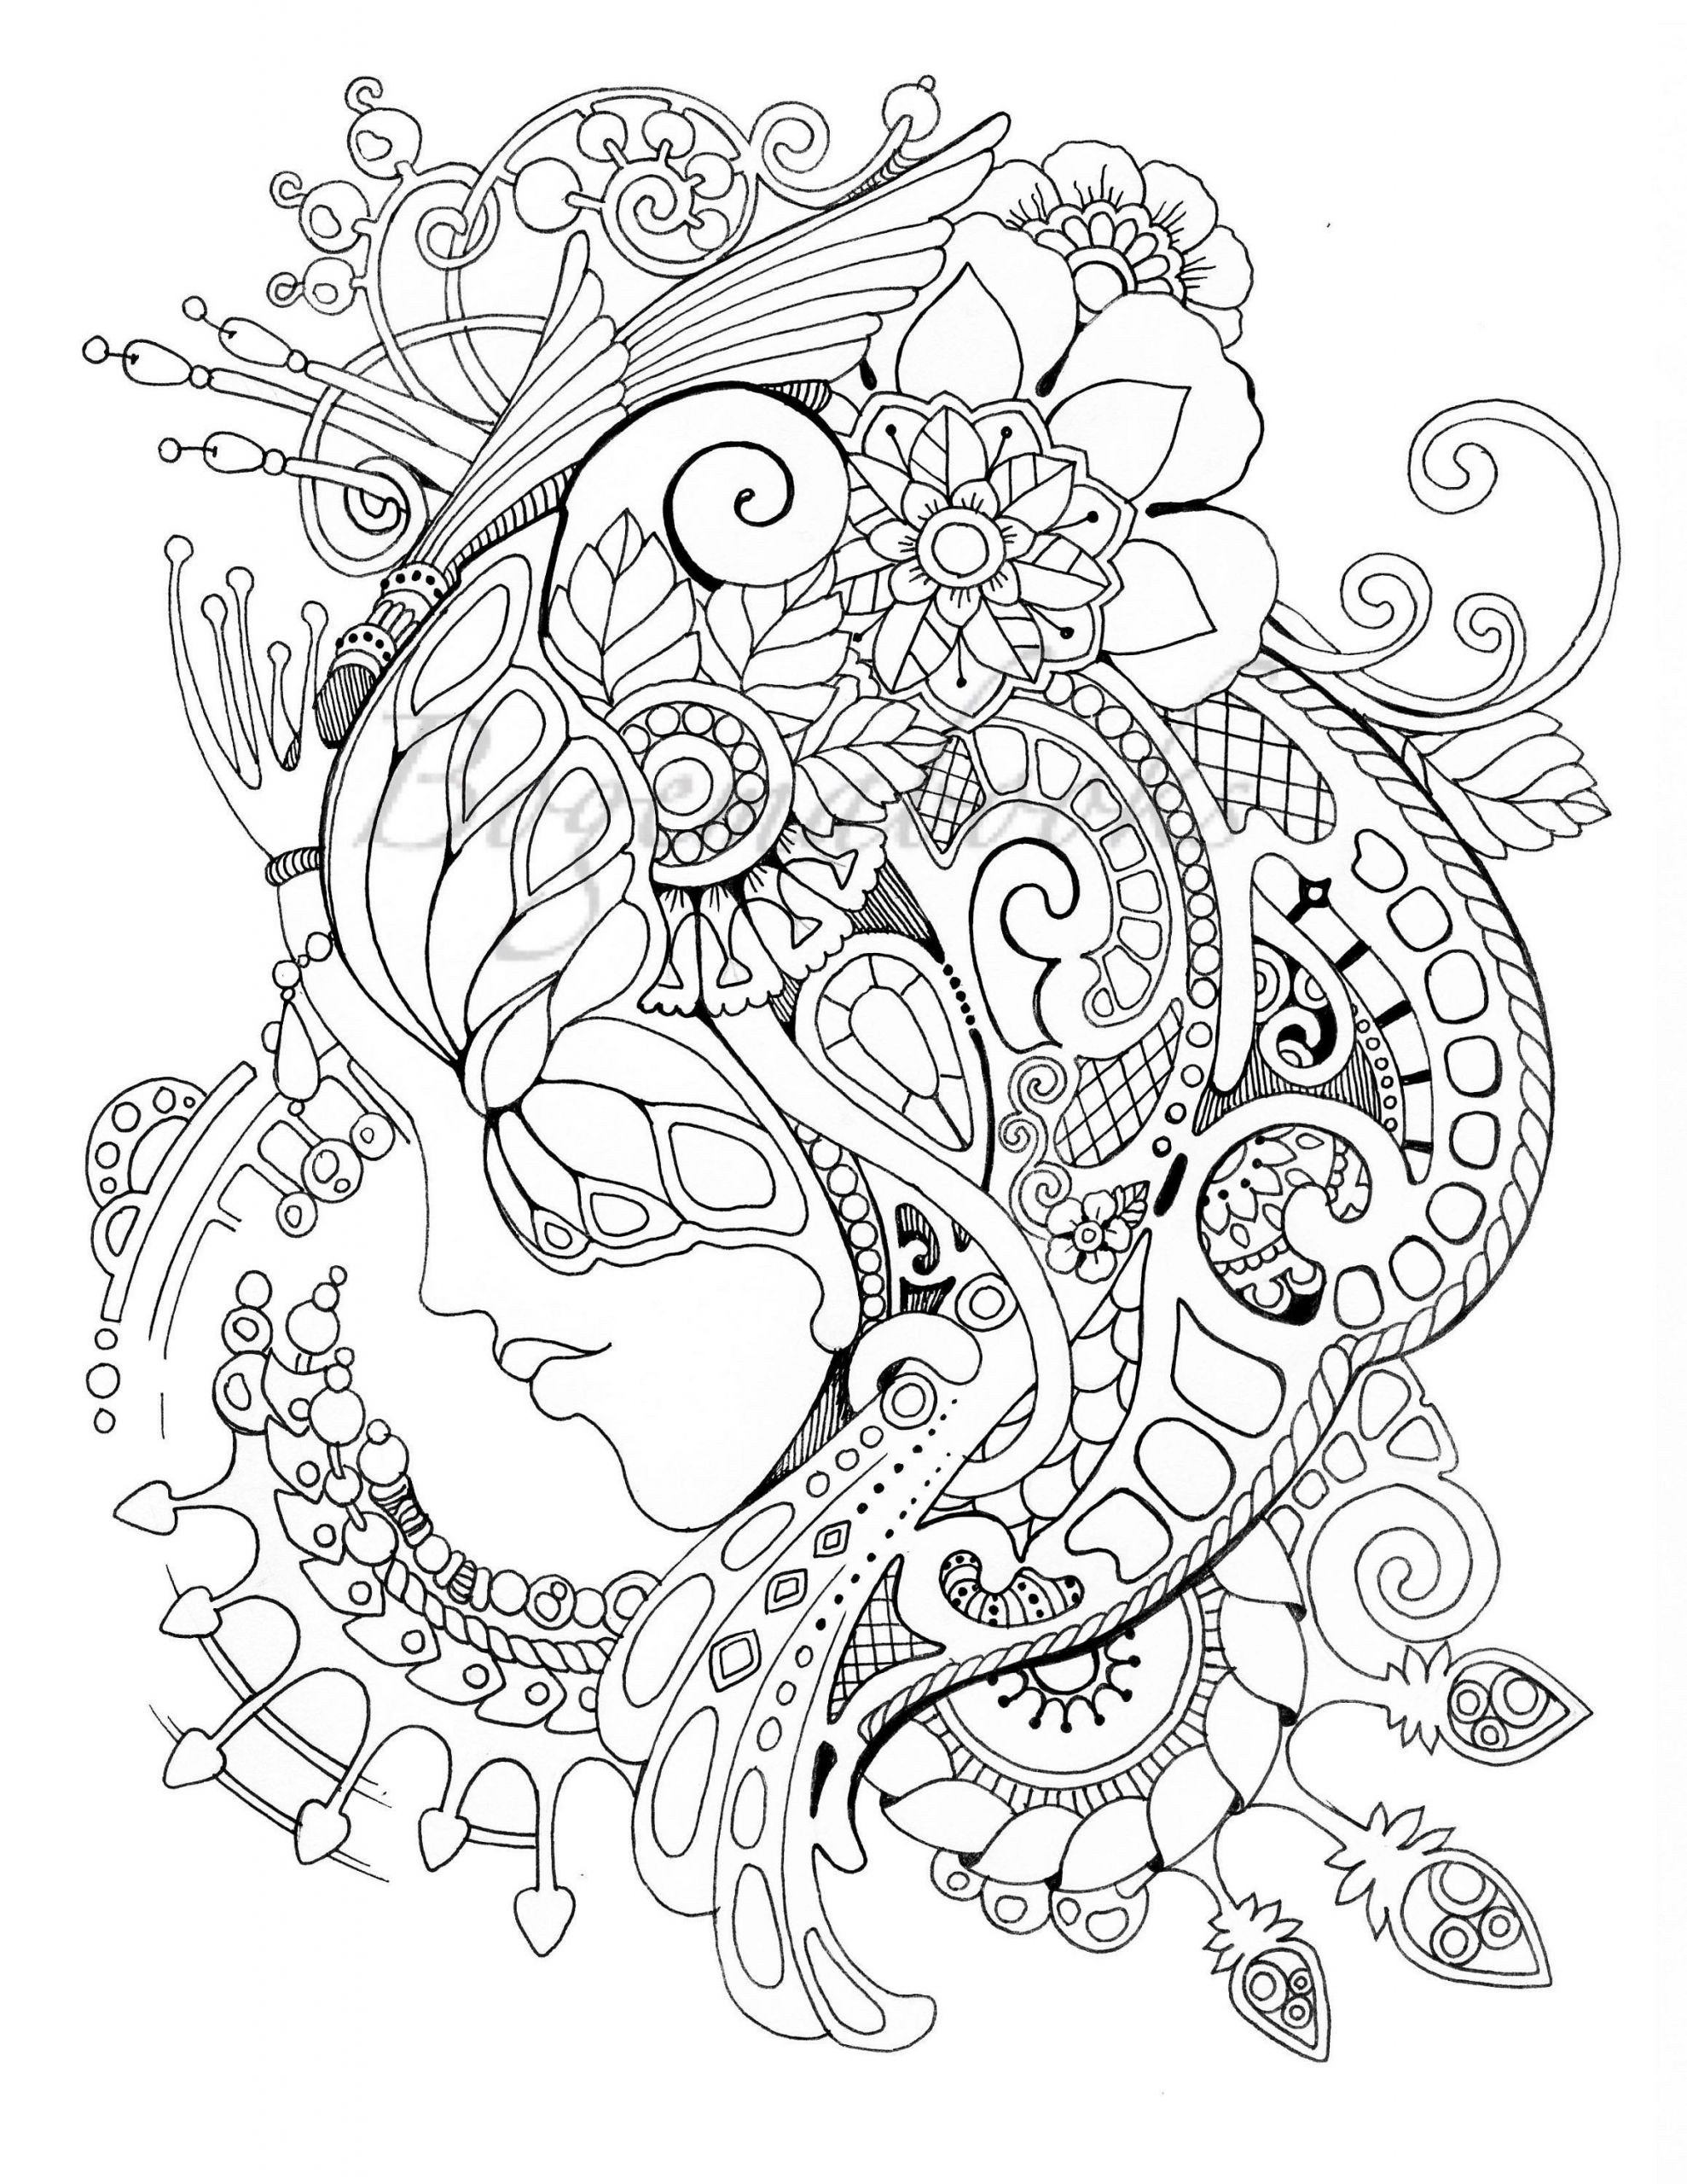 coloring pages : Intricate Coloring Pages Pdf Awesome Magic Mask ...